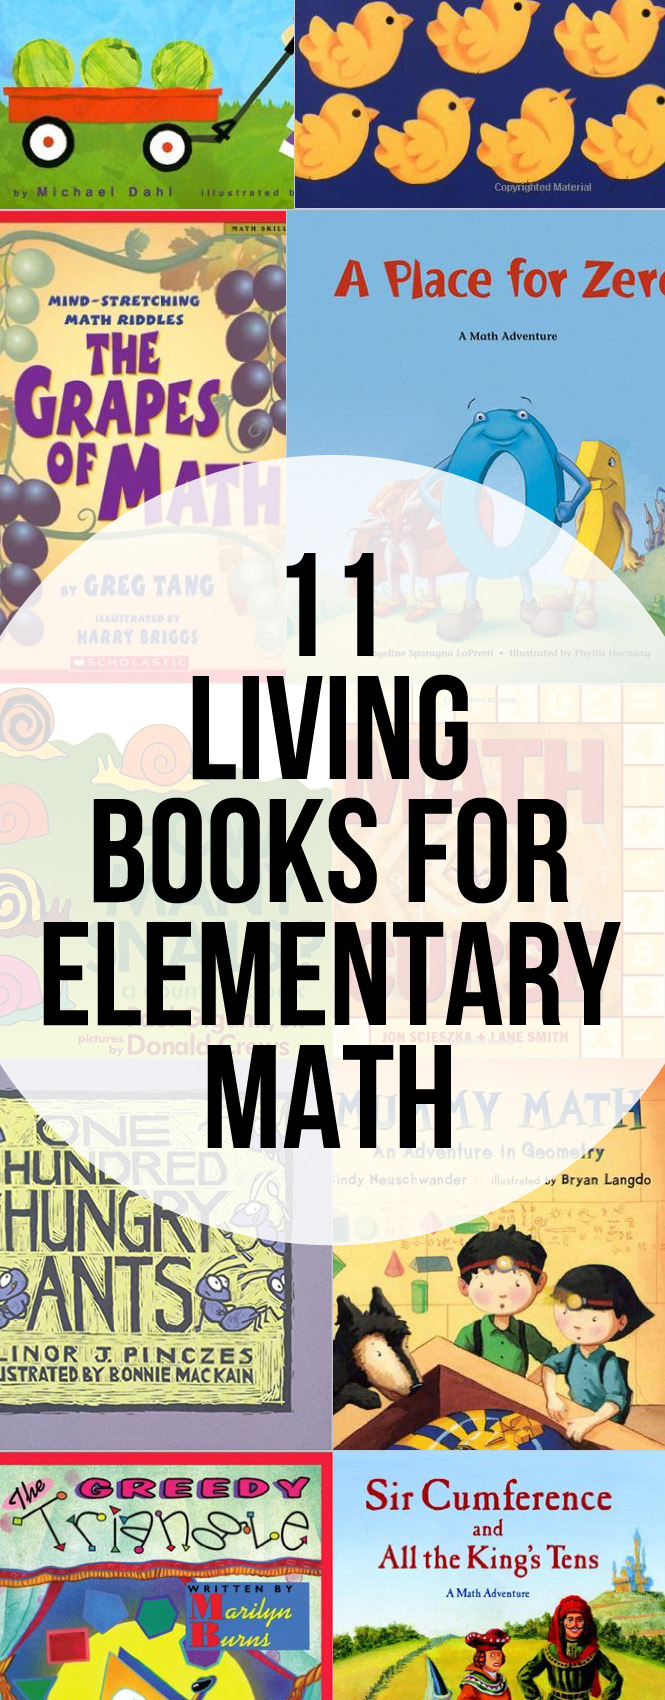 A list of great living books for elementary math, as well as some ideas on how to make math more interesting for children.